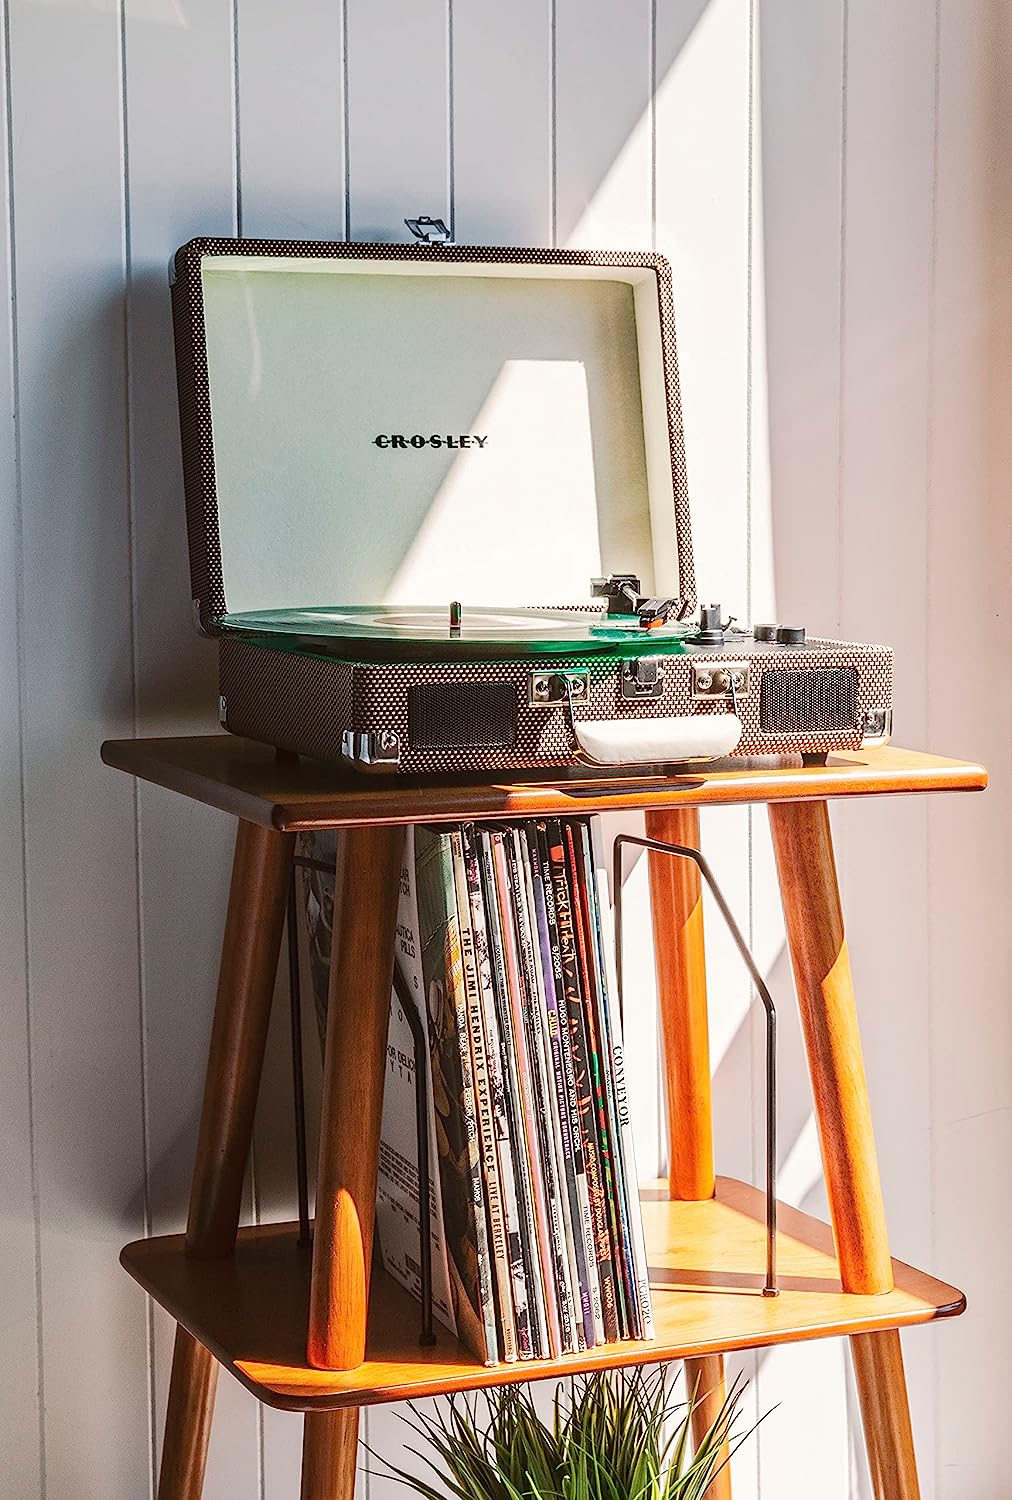 Crosley CR8005F-MT Cruiser Plus Vintage 3-Speed Bluetooth in/Out Suitcase Vinyl Record Player Turntable, Mint